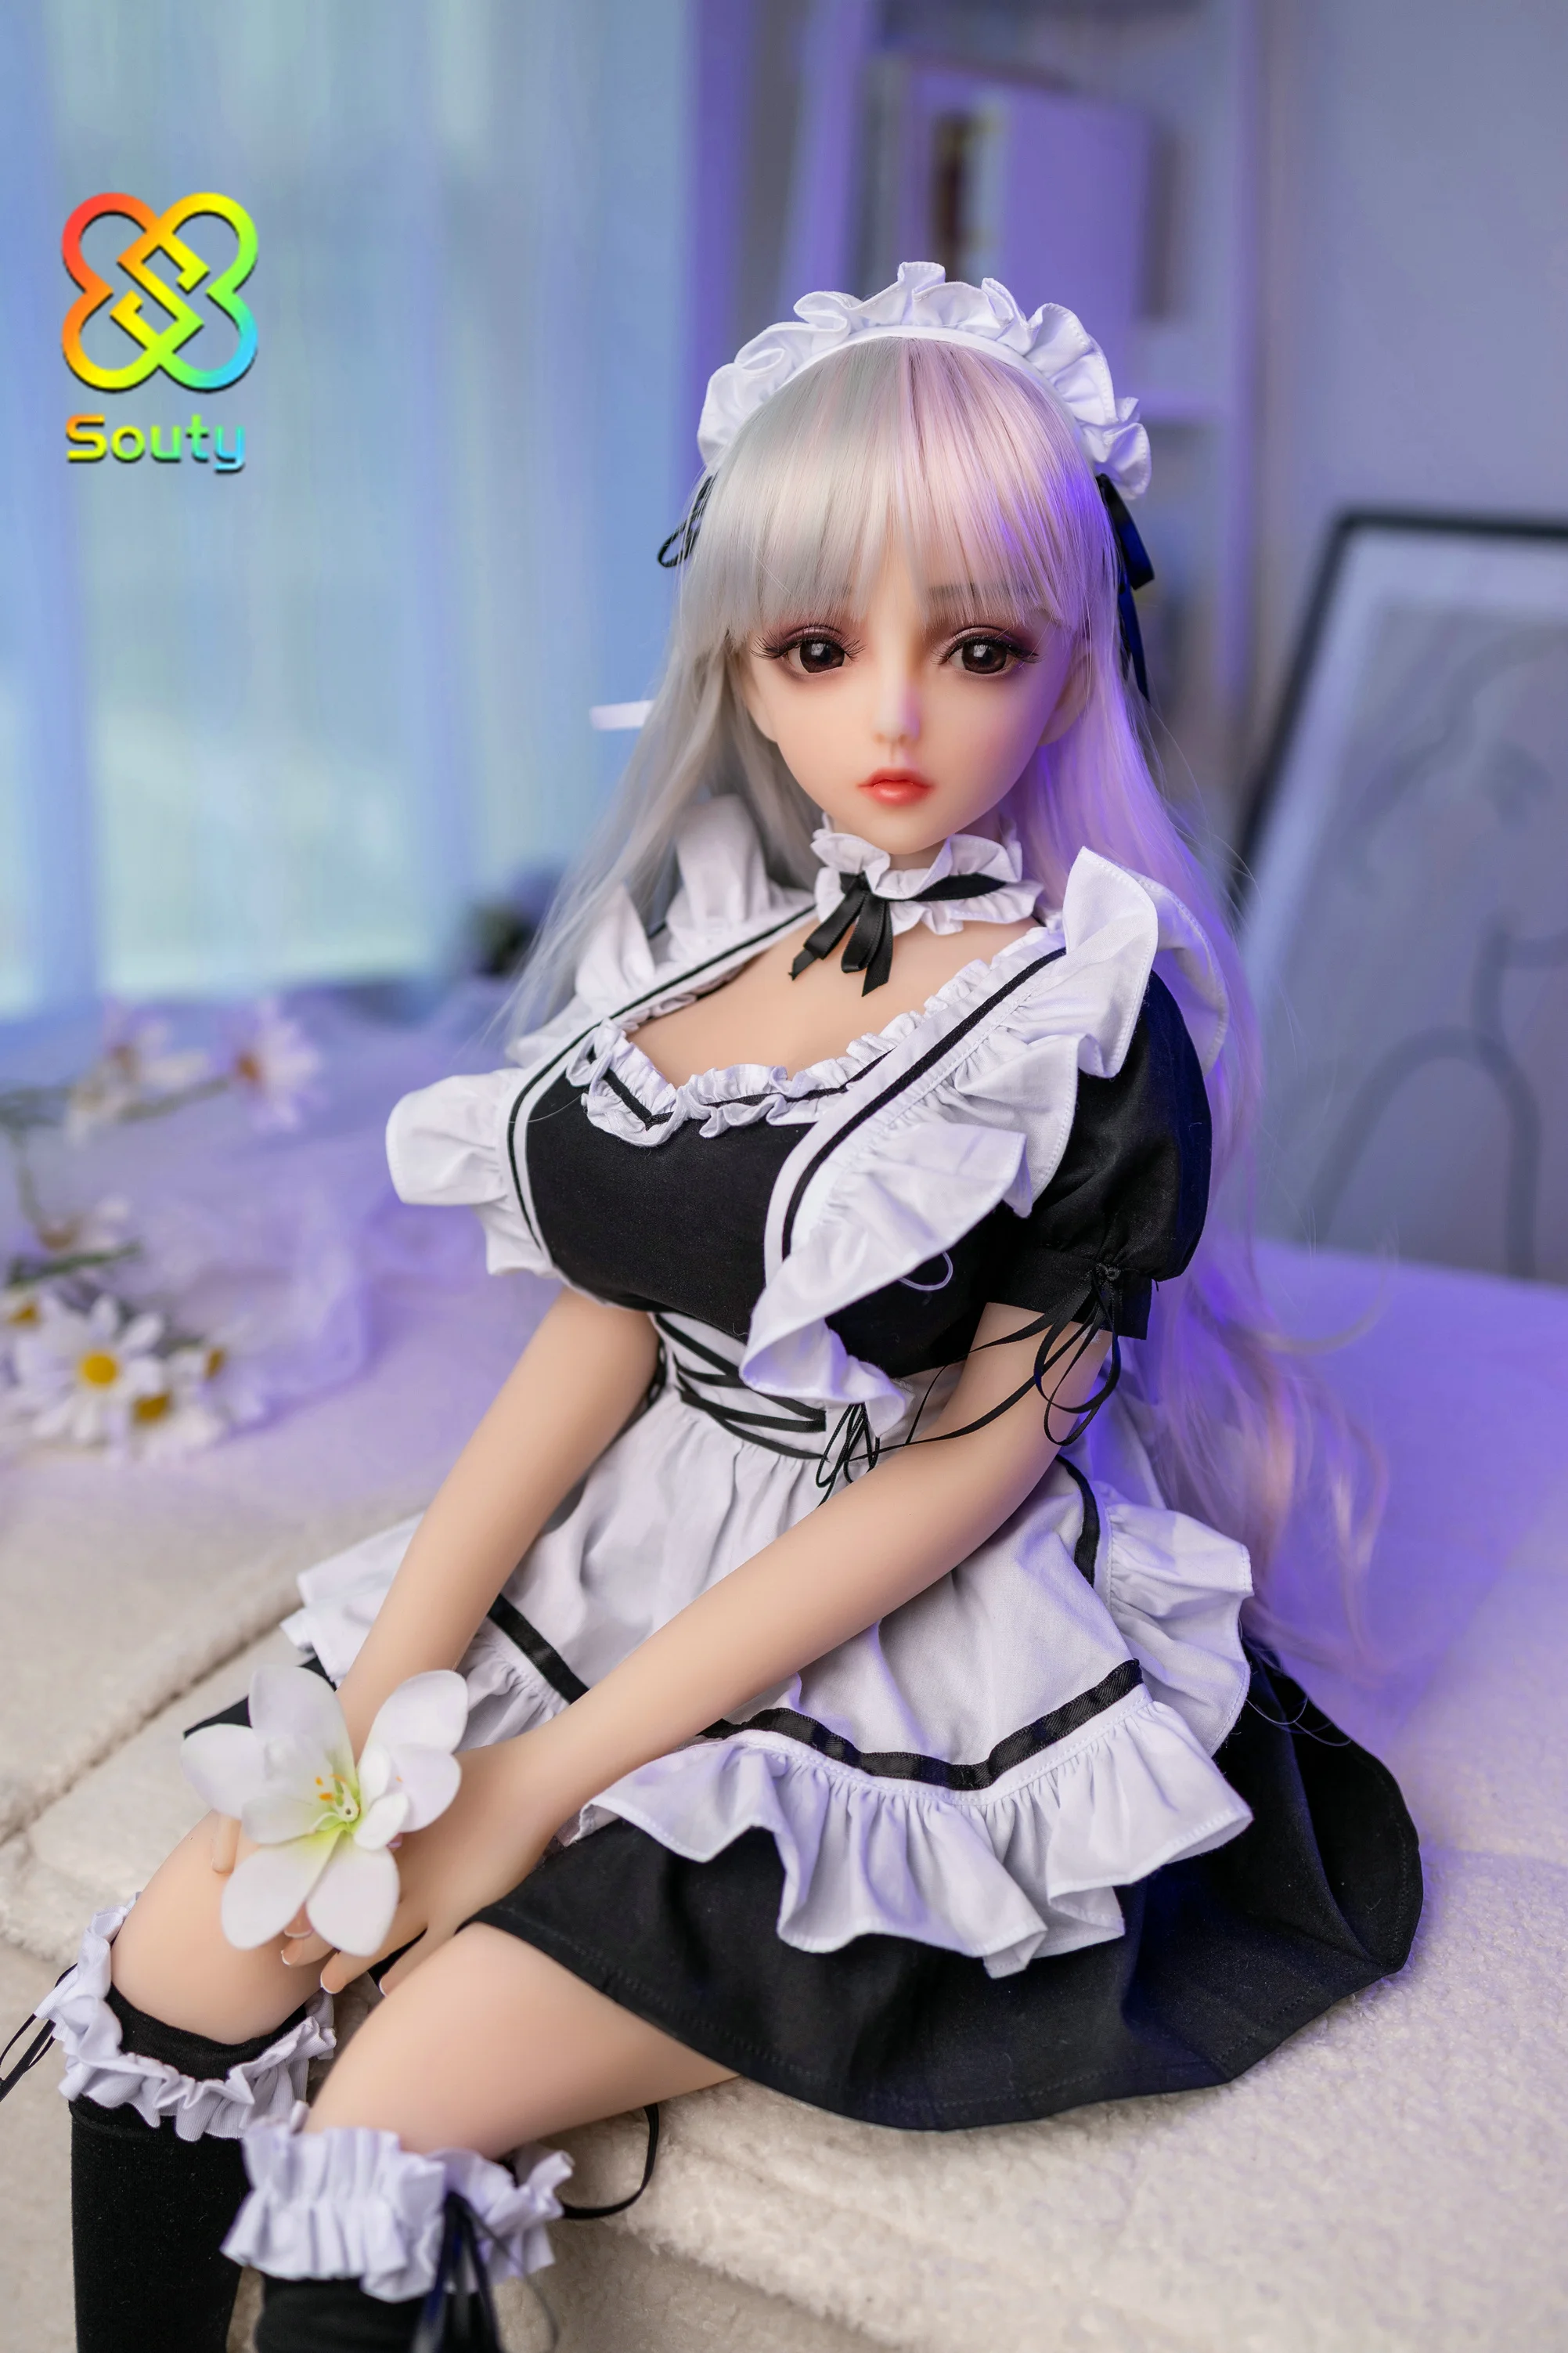 

Hot Lolita Maid Uniform Babydoll Dress Lingerie Porn Erotic Role Play Women Sexy Lingerie Maid Cosplay Costumes Maids Underwear